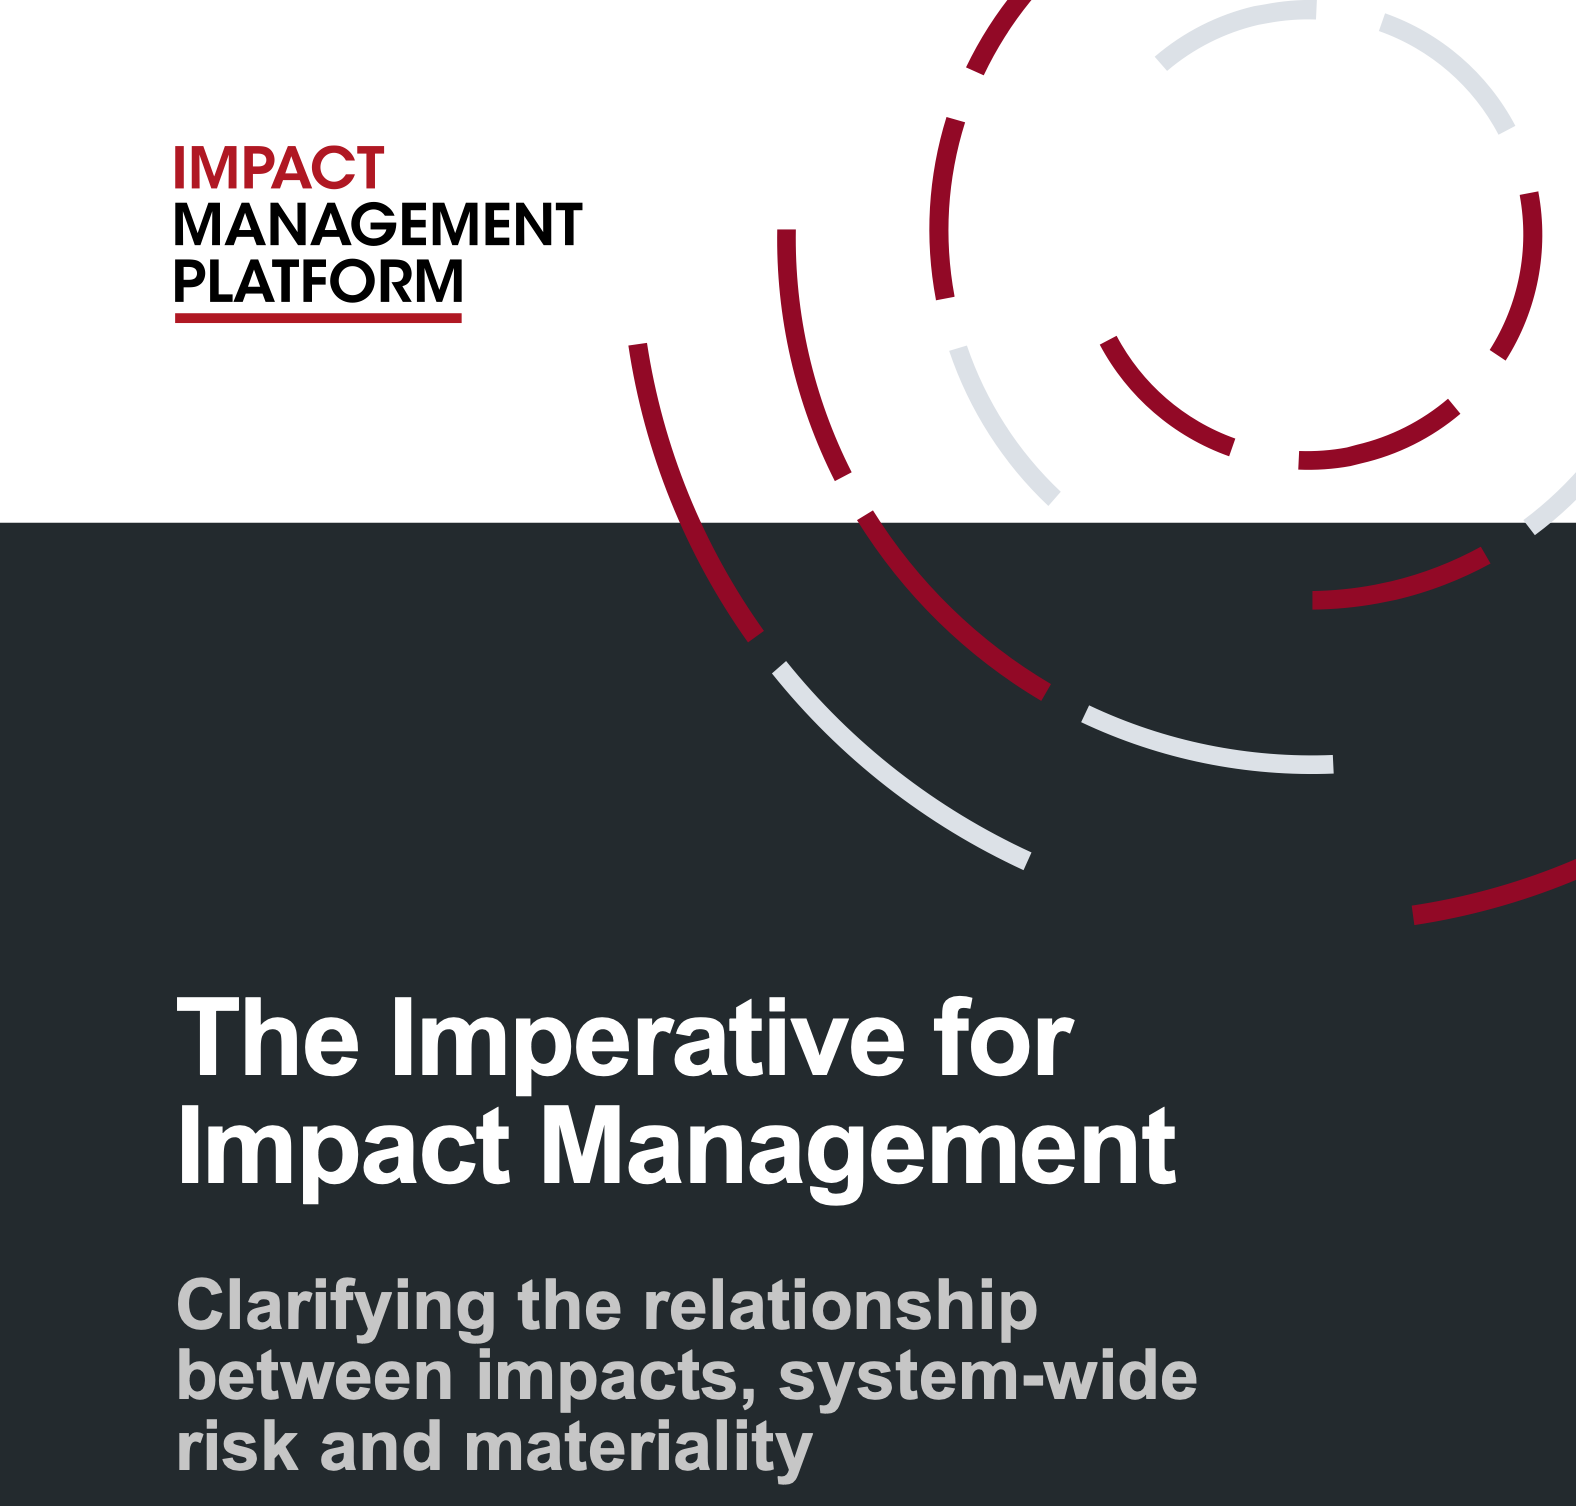 The Imperative for Impact Management